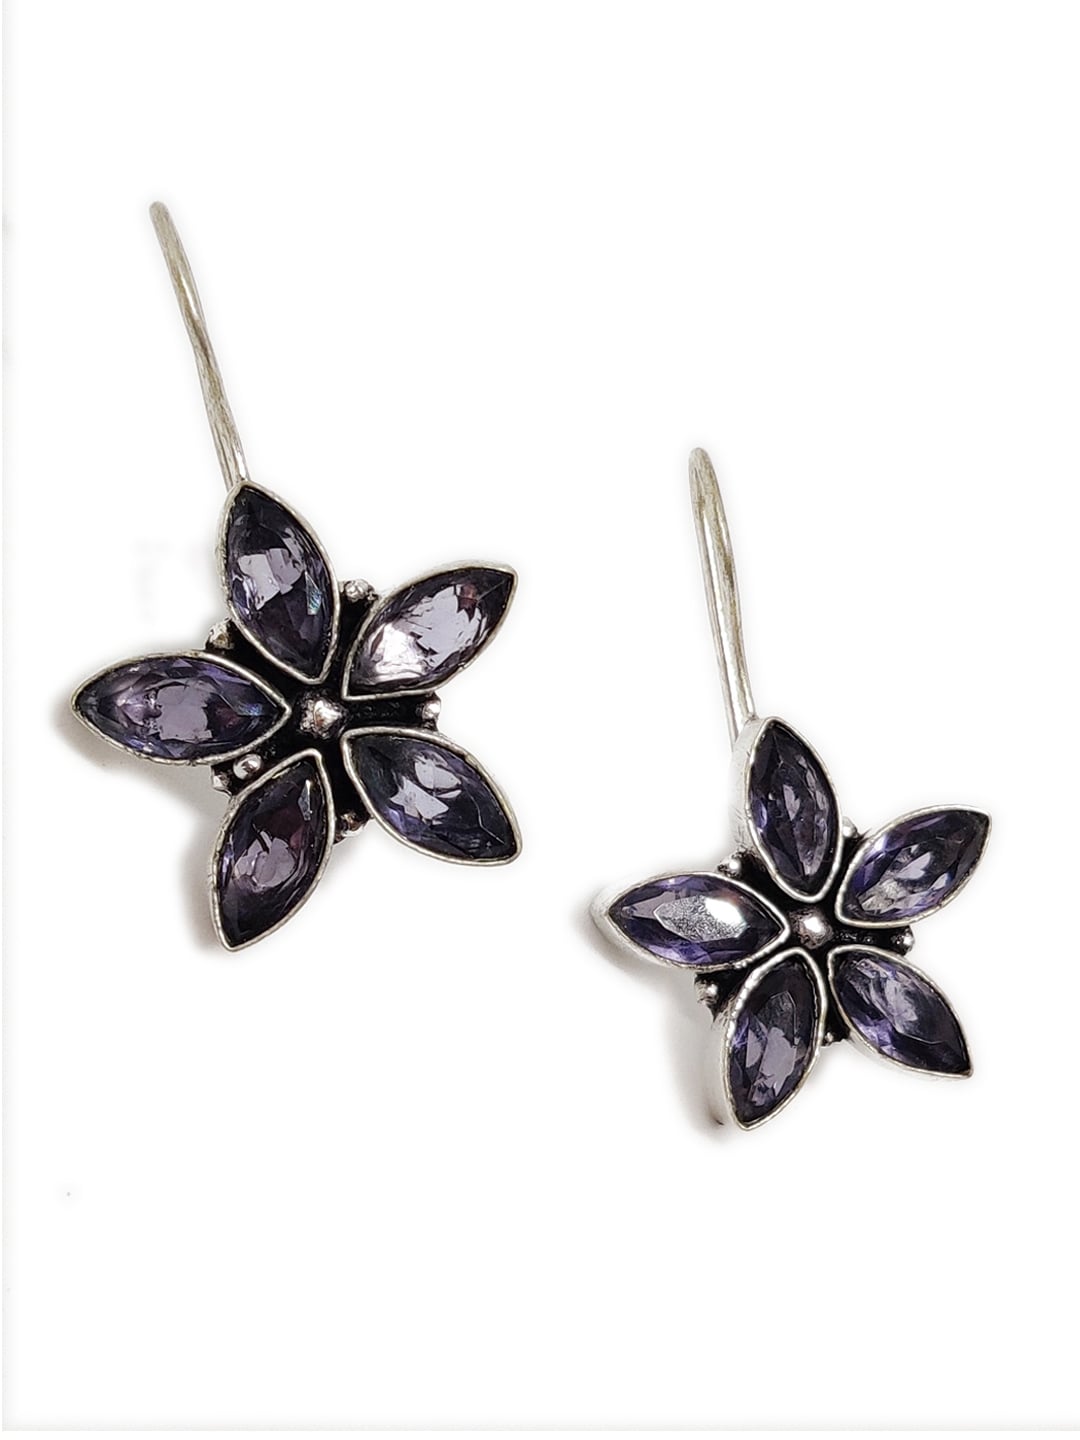 EL REGALO White & Silver-Toned Floral Drop Earrings - for Women and Girls
Style ID: 16770264